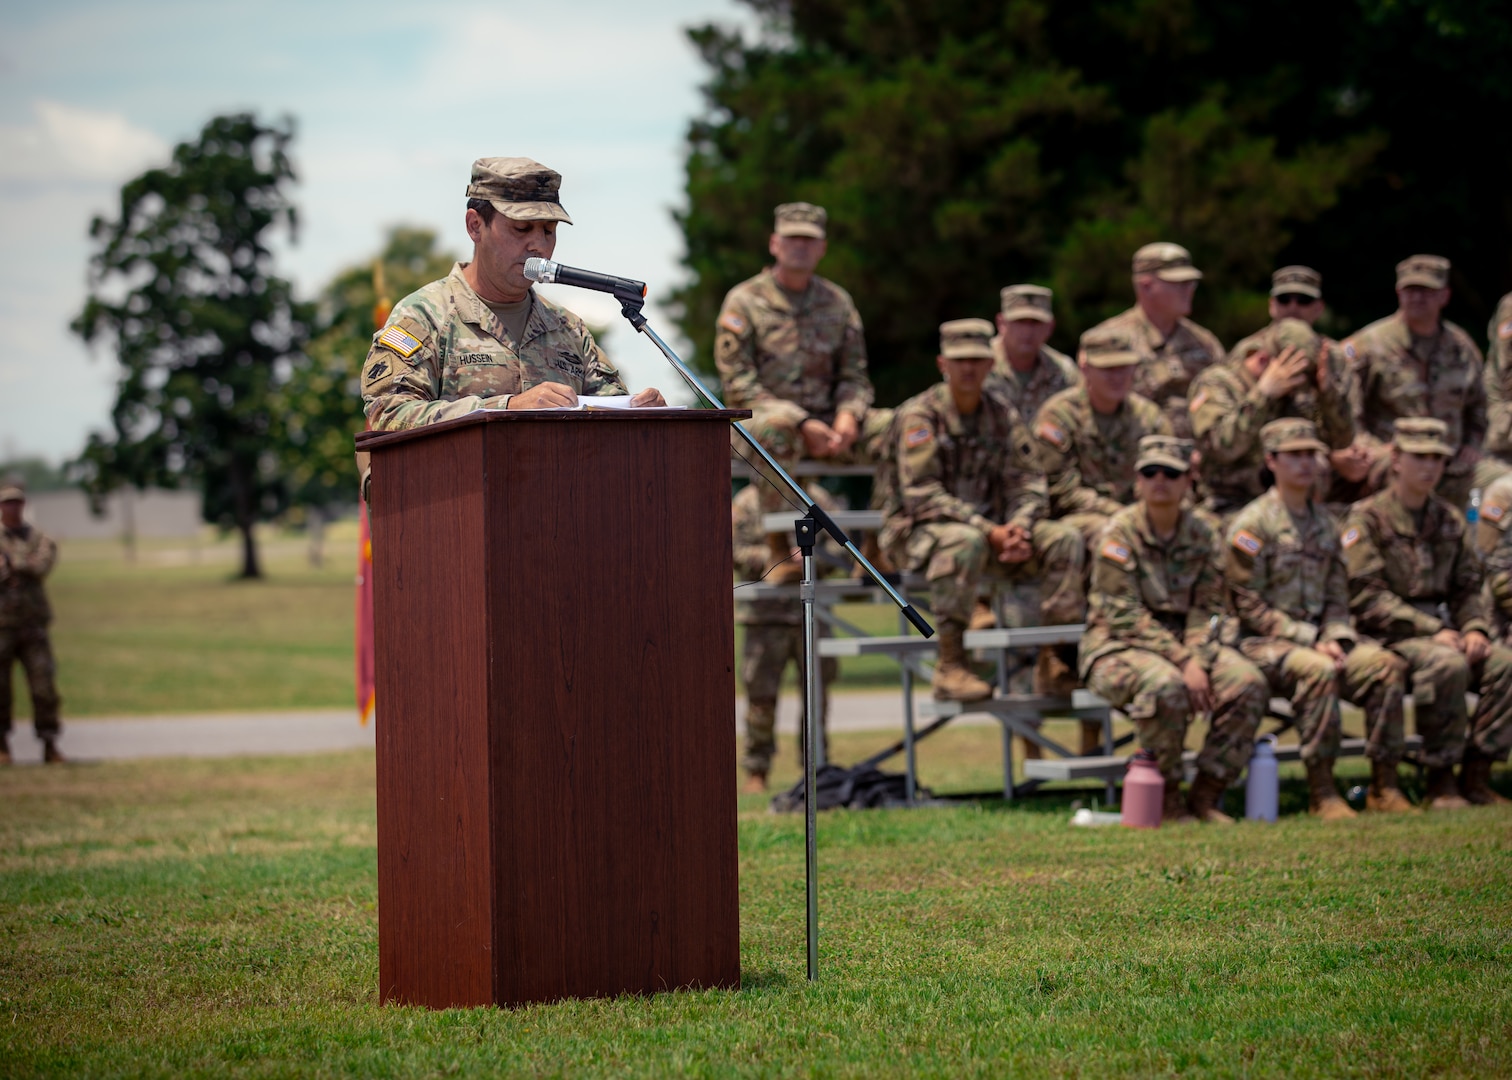 Col. Khalid Hussein, incoming commander of the 45th Infantry Brigade Combat Team, speaks during a change of command ceremony held at Camp Gruber Training Center near Braggs, Oklahoma, June 11, 2024. Hussein brings extensive experience to his new role, having served in numerous command and staff positions within the IBCT. Outgoing commander, Col. Andrew Ballenger, served in the position since 2022. (Oklahoma National Guard photo by Cpl. Danielle Rayon)